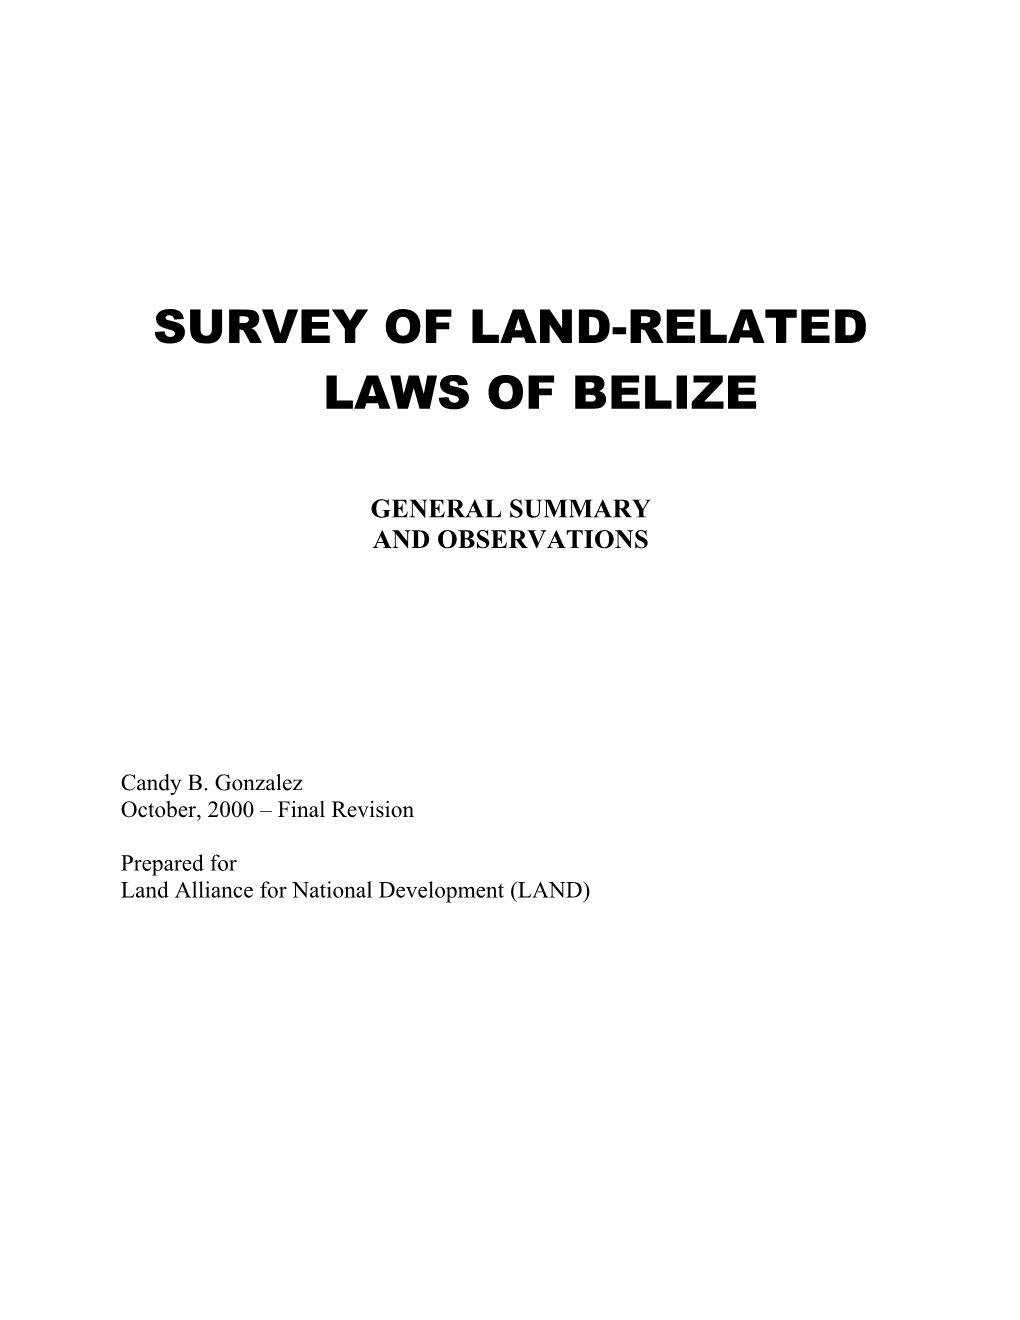 Survey of Land-Related Laws of Belize